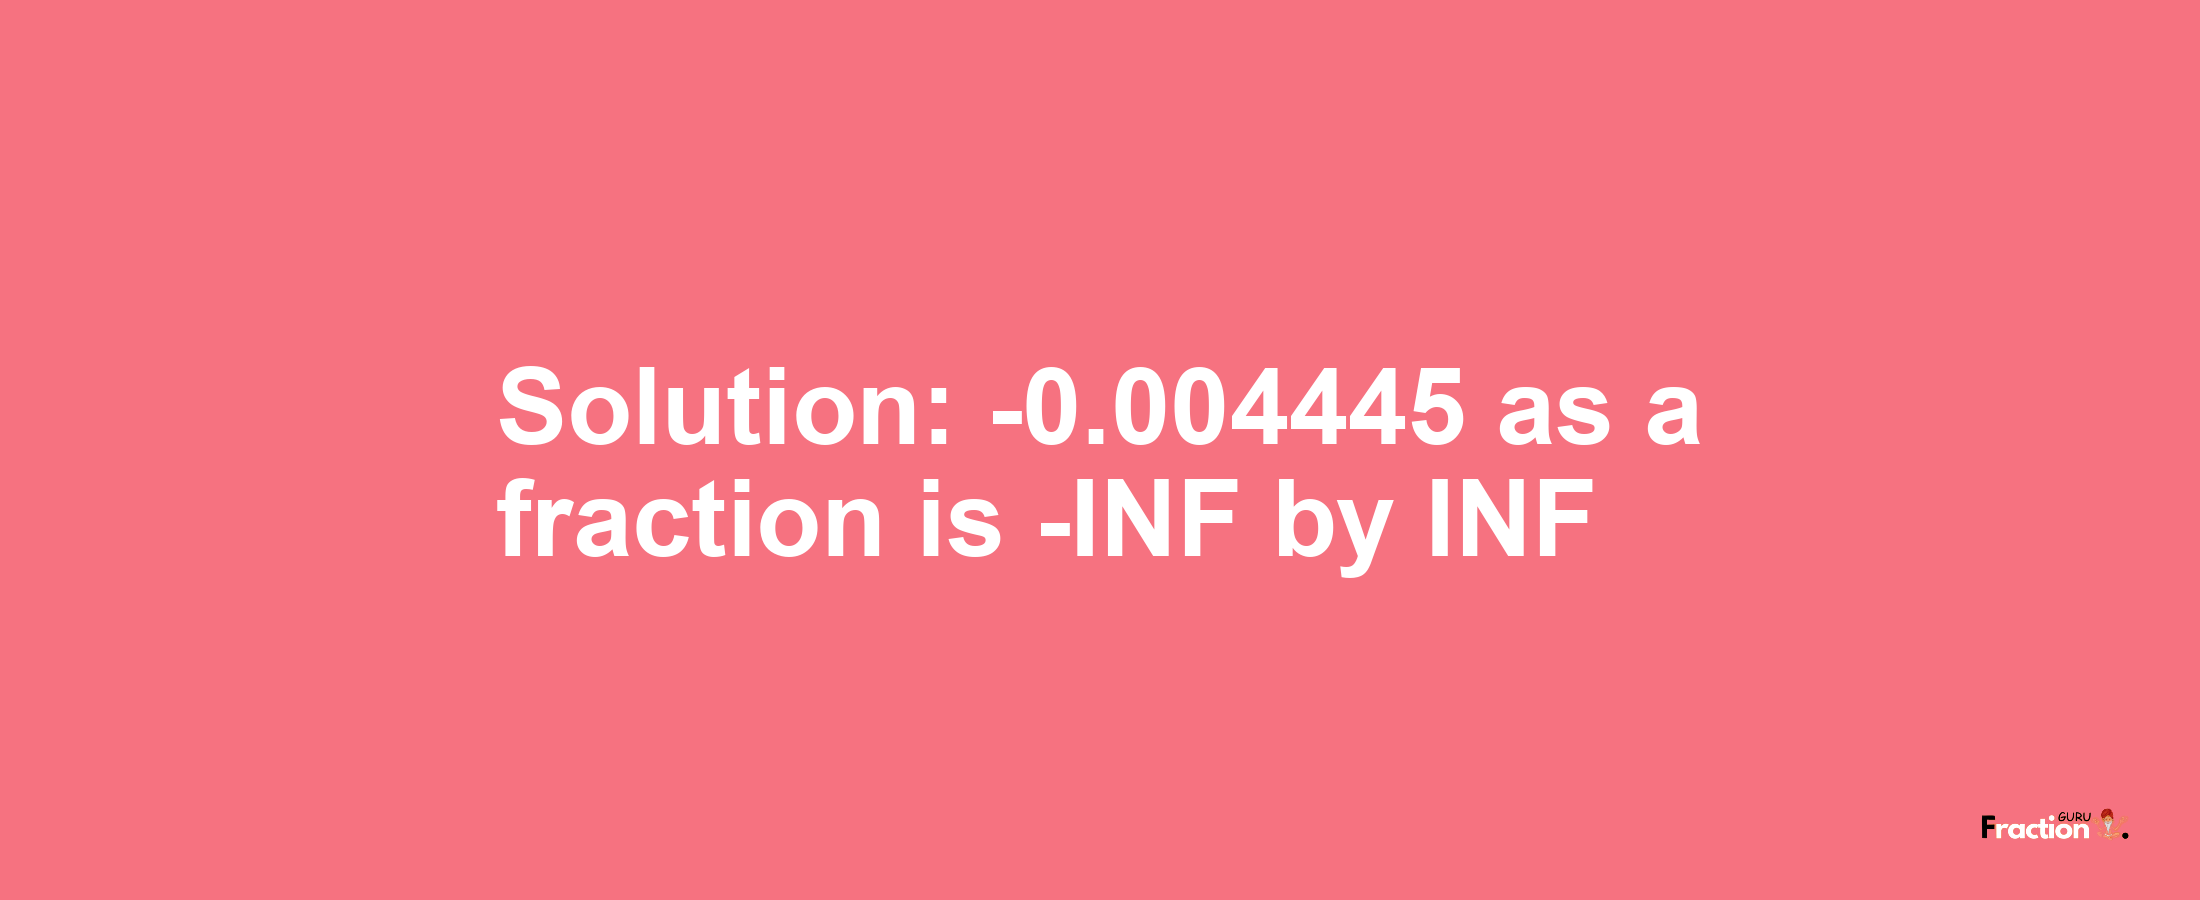 Solution:-0.004445 as a fraction is -INF/INF